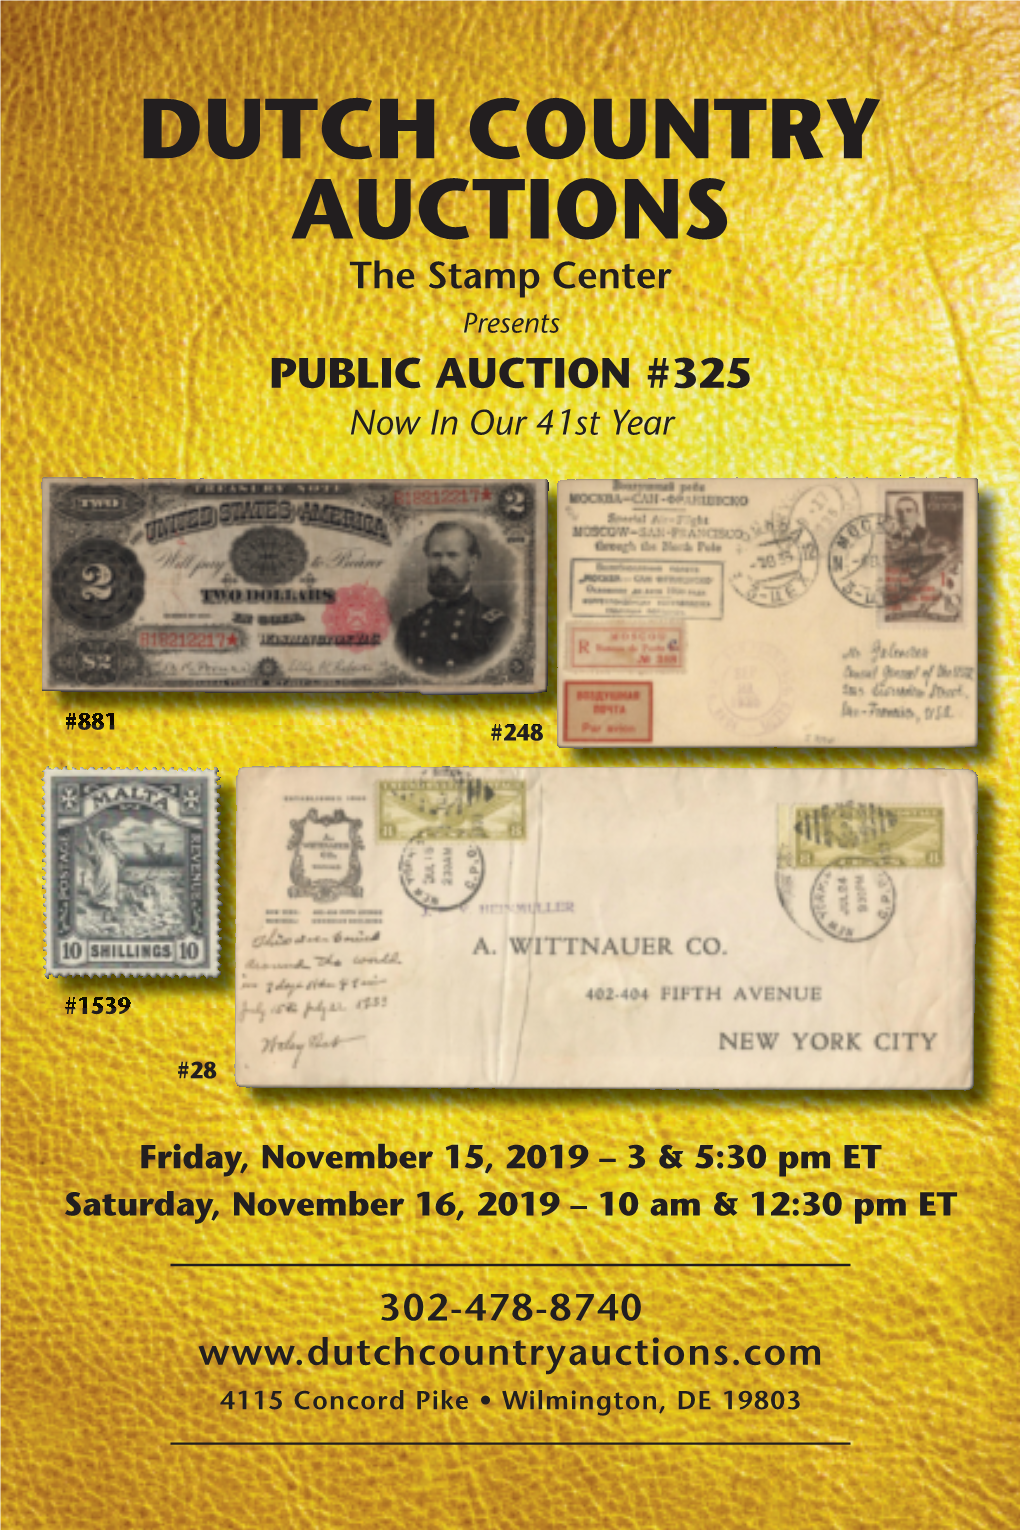 DUTCH COUNTRY AUCTIONS the Stamp Center Presents PUBLIC AUCTION #325 Now in Our 41St Year